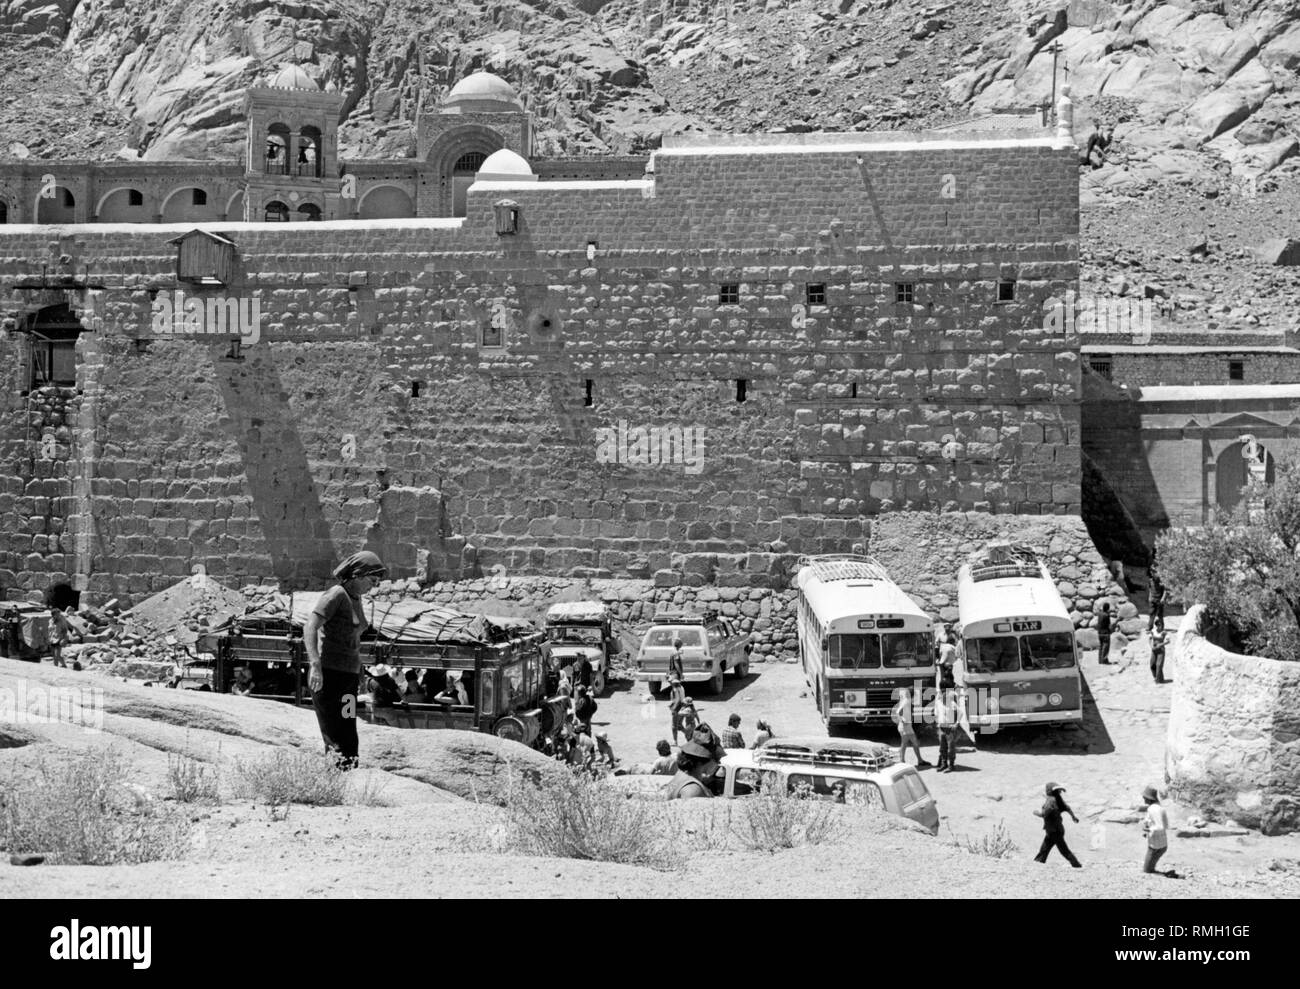 Buses with tourists park in front of the St. Catherine's Monastery on the Sinai in today's Egypt. St. Catherine's Monastery is the oldest inhabited Christian monastery. The photo was taken under Israeli occupation of the Sinai. Israel occupied the peninsula twice: after the Suez Crisis in 1956, and from 1967 to 1982 as a result of the Six-Day War. Stock Photo